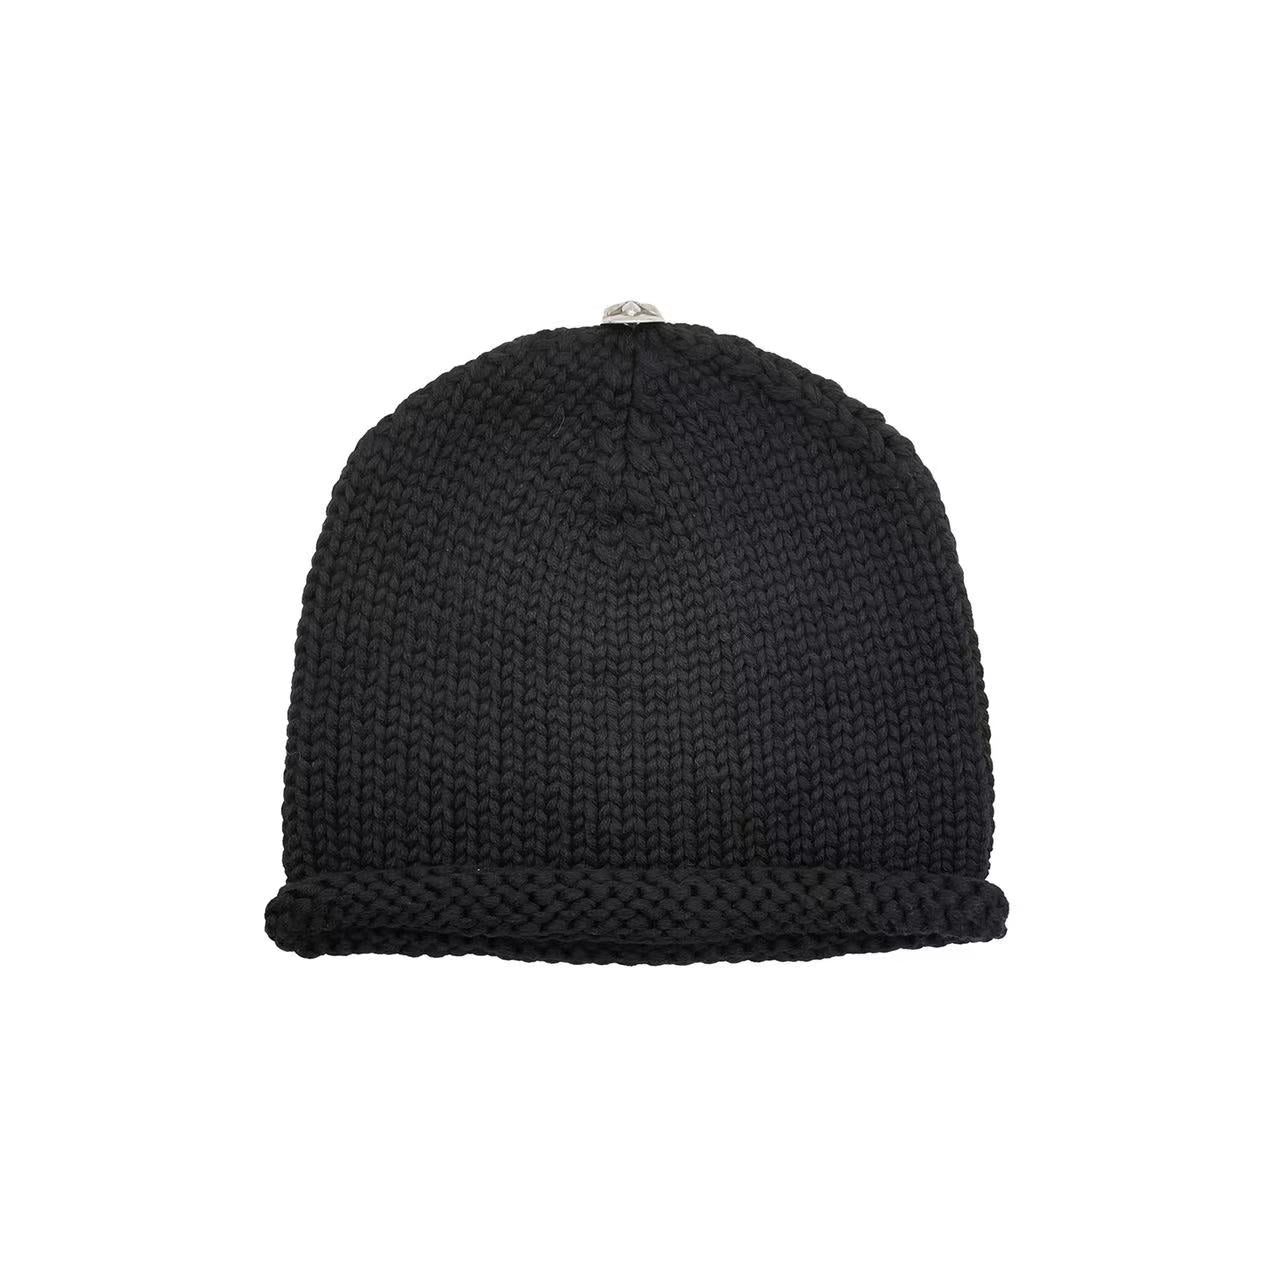 Chrome Hearts Cashmere Leather With Silver Fleur Beanie - SHENGLI ROAD MARKET